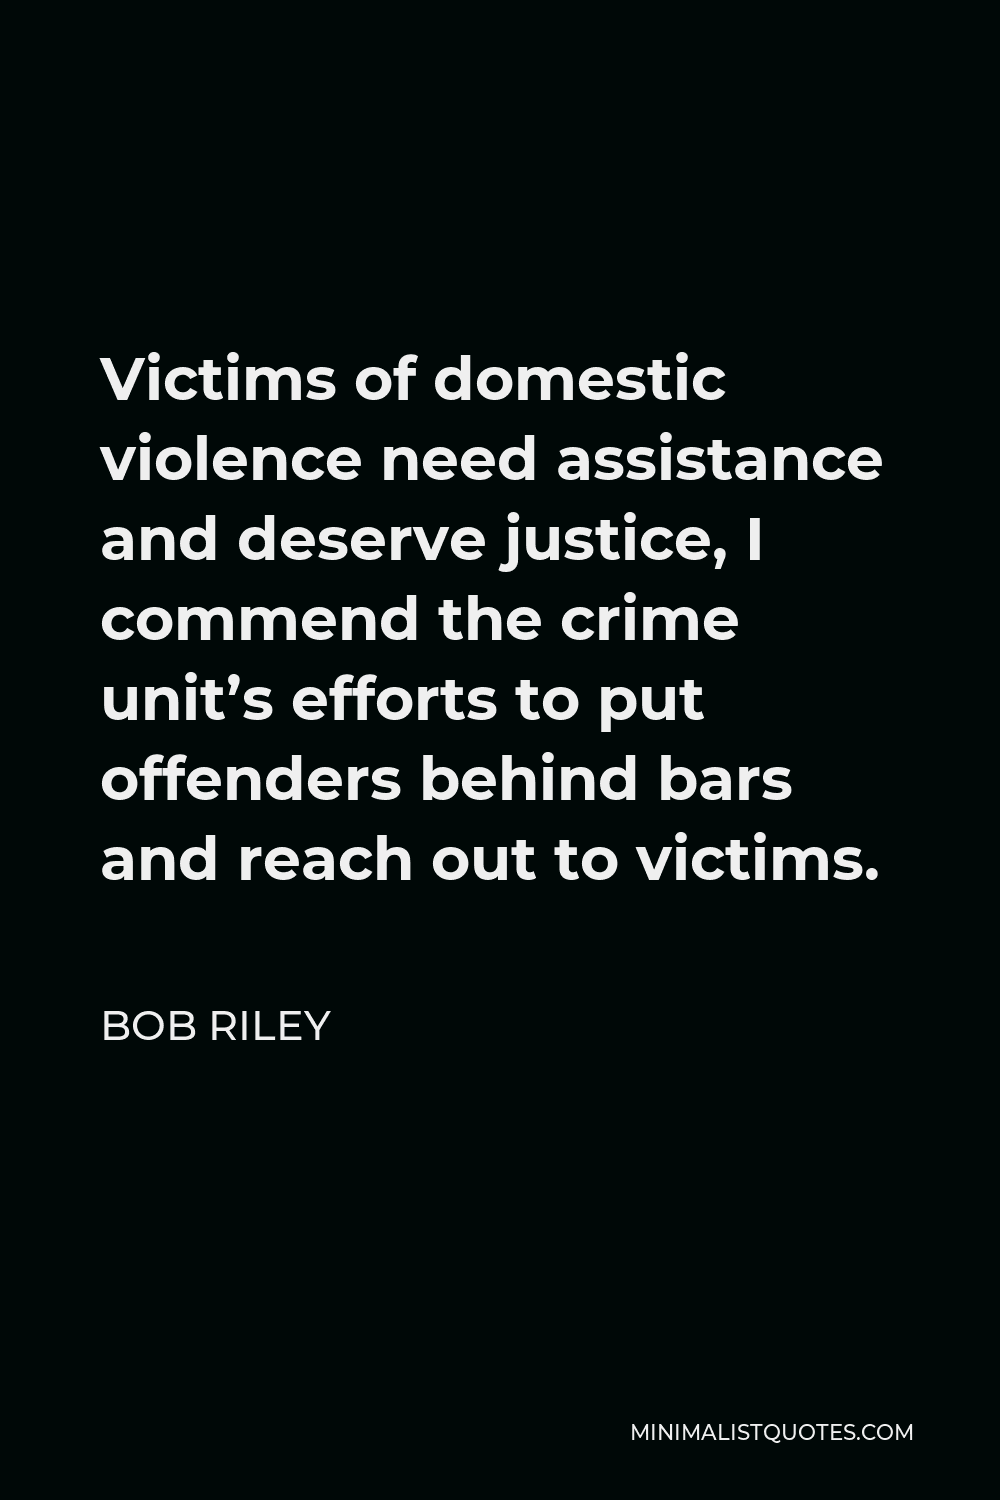 Bob Riley Quote - Victims of domestic violence need assistance and deserve justice, I commend the crime unit’s efforts to put offenders behind bars and reach out to victims.